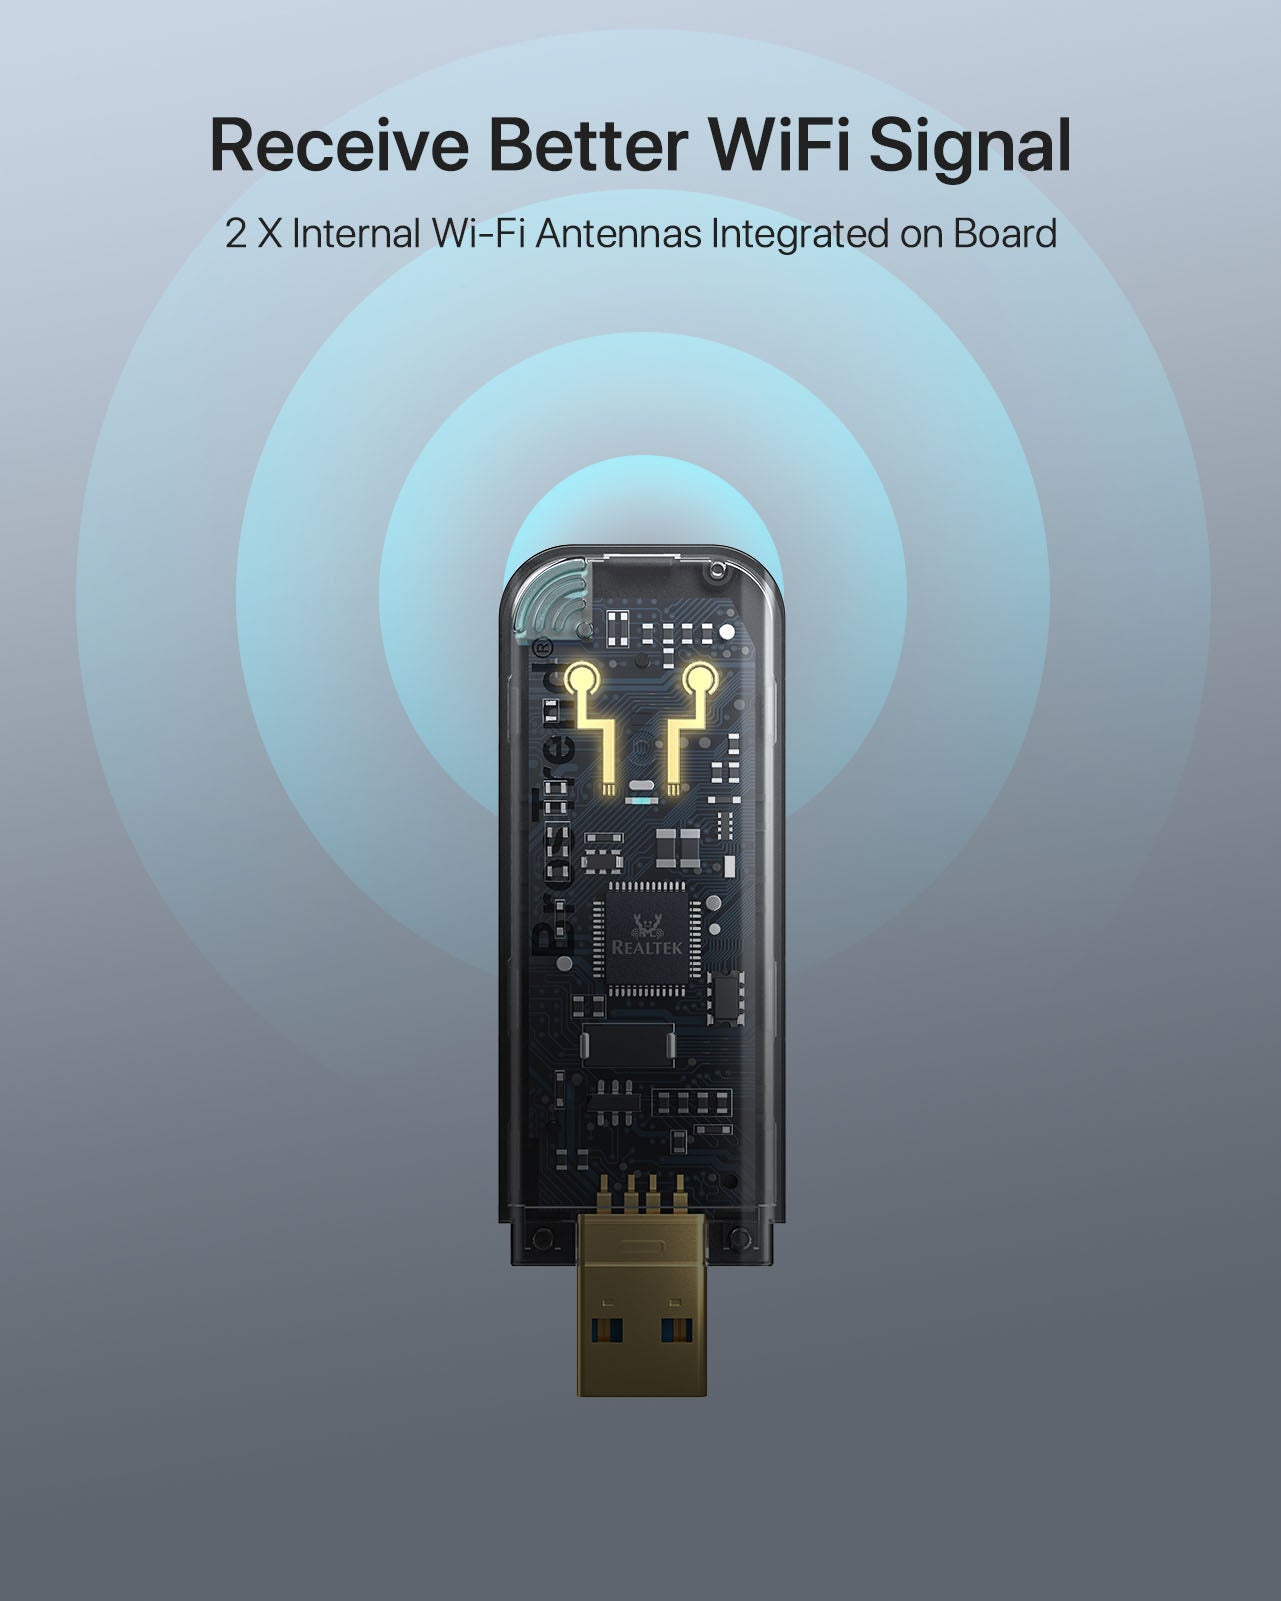 BrosTrend Linux Compatible USB WiFi Adapter with Internal WiFi Antennas Boosts Better Wireless Signal on Your Linux Devices